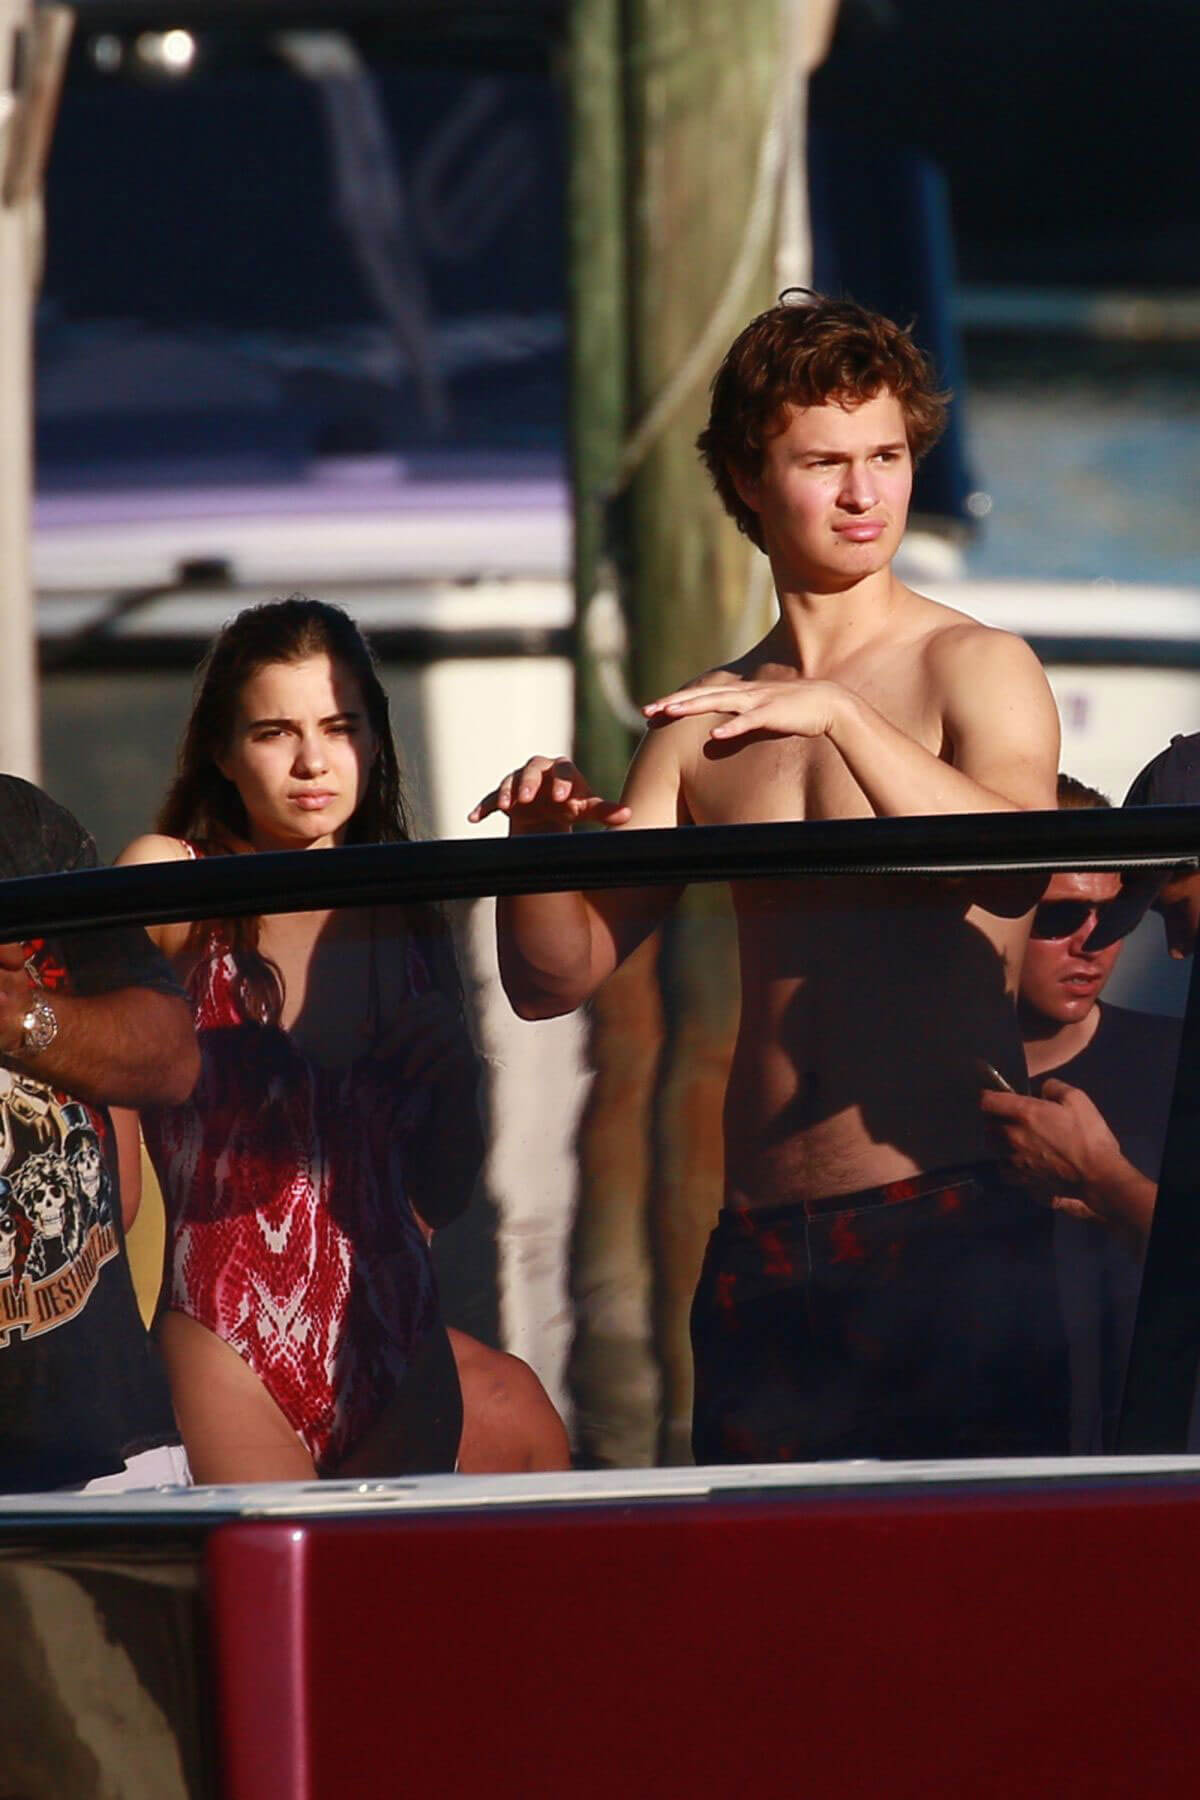 Violetta Komyshan and Ansel Elgort on a Boat Ride in Miami